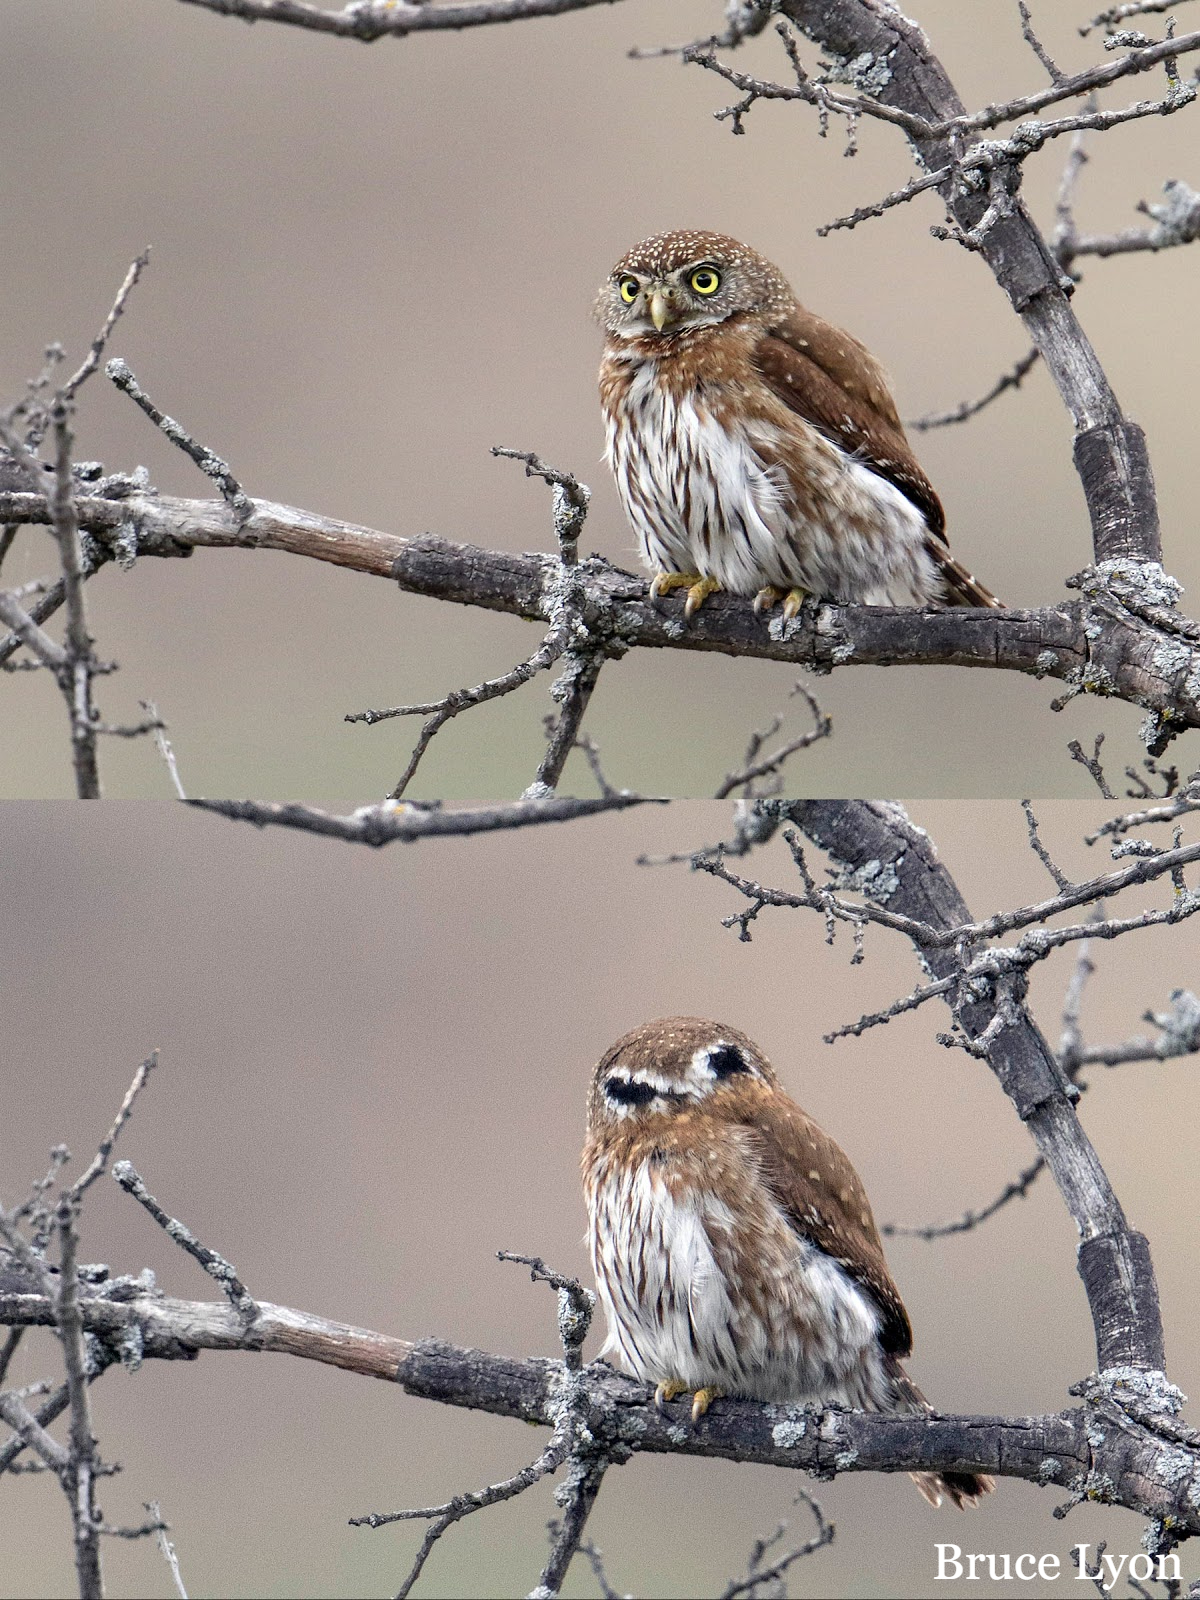 pygmy owls showing the false eyes behind the head